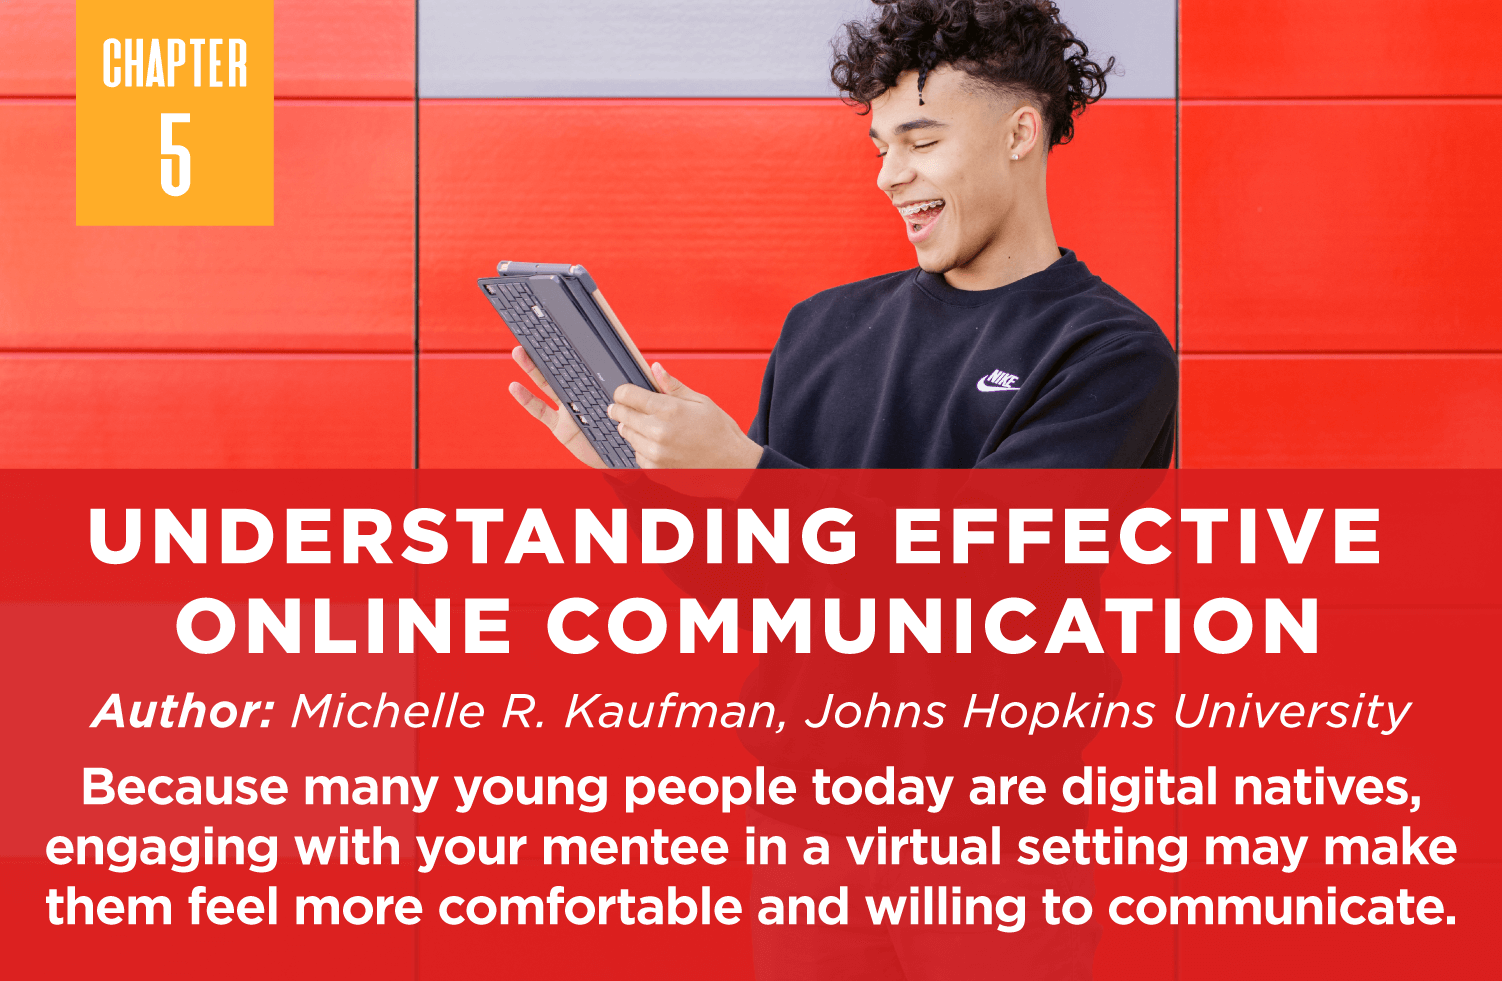 Understanding Effective 
Online Communication
Author: Michelle R. Kaufman, Johns Hopkins University

Because many young people today are digital natives, engaging with your mentee in a virtual setting may make them feel more comfortable and willing to communicate.